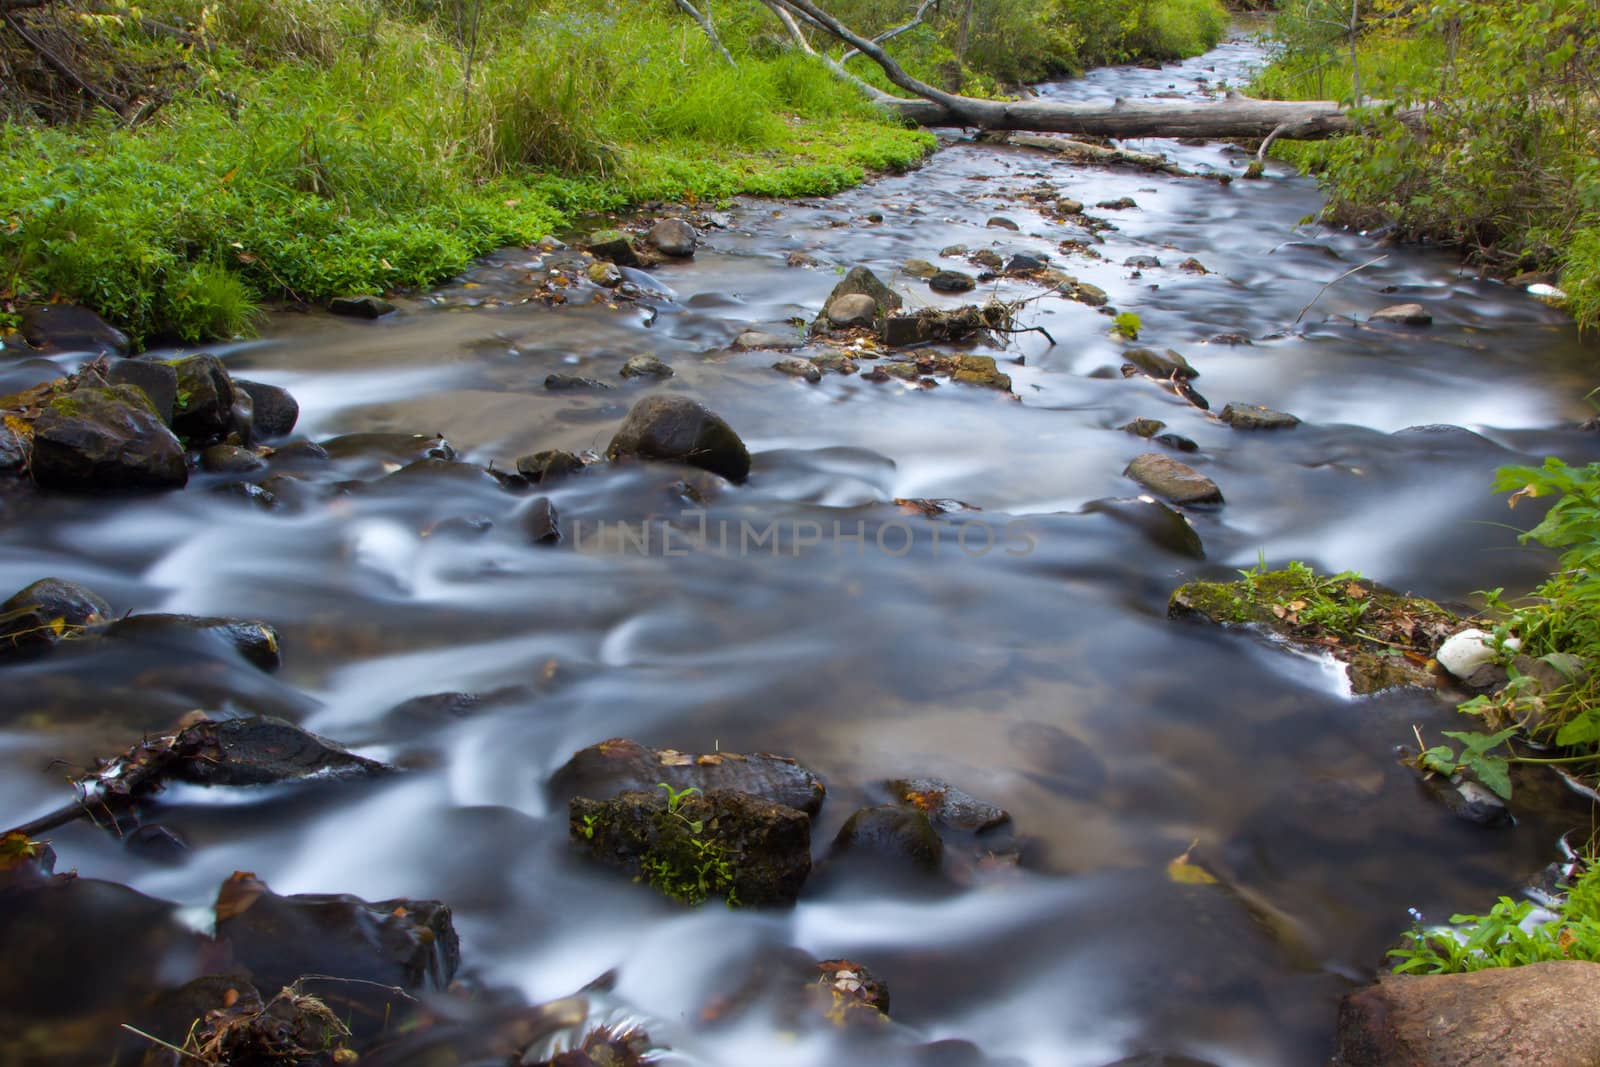 The Flowing Water of Osceola Creek